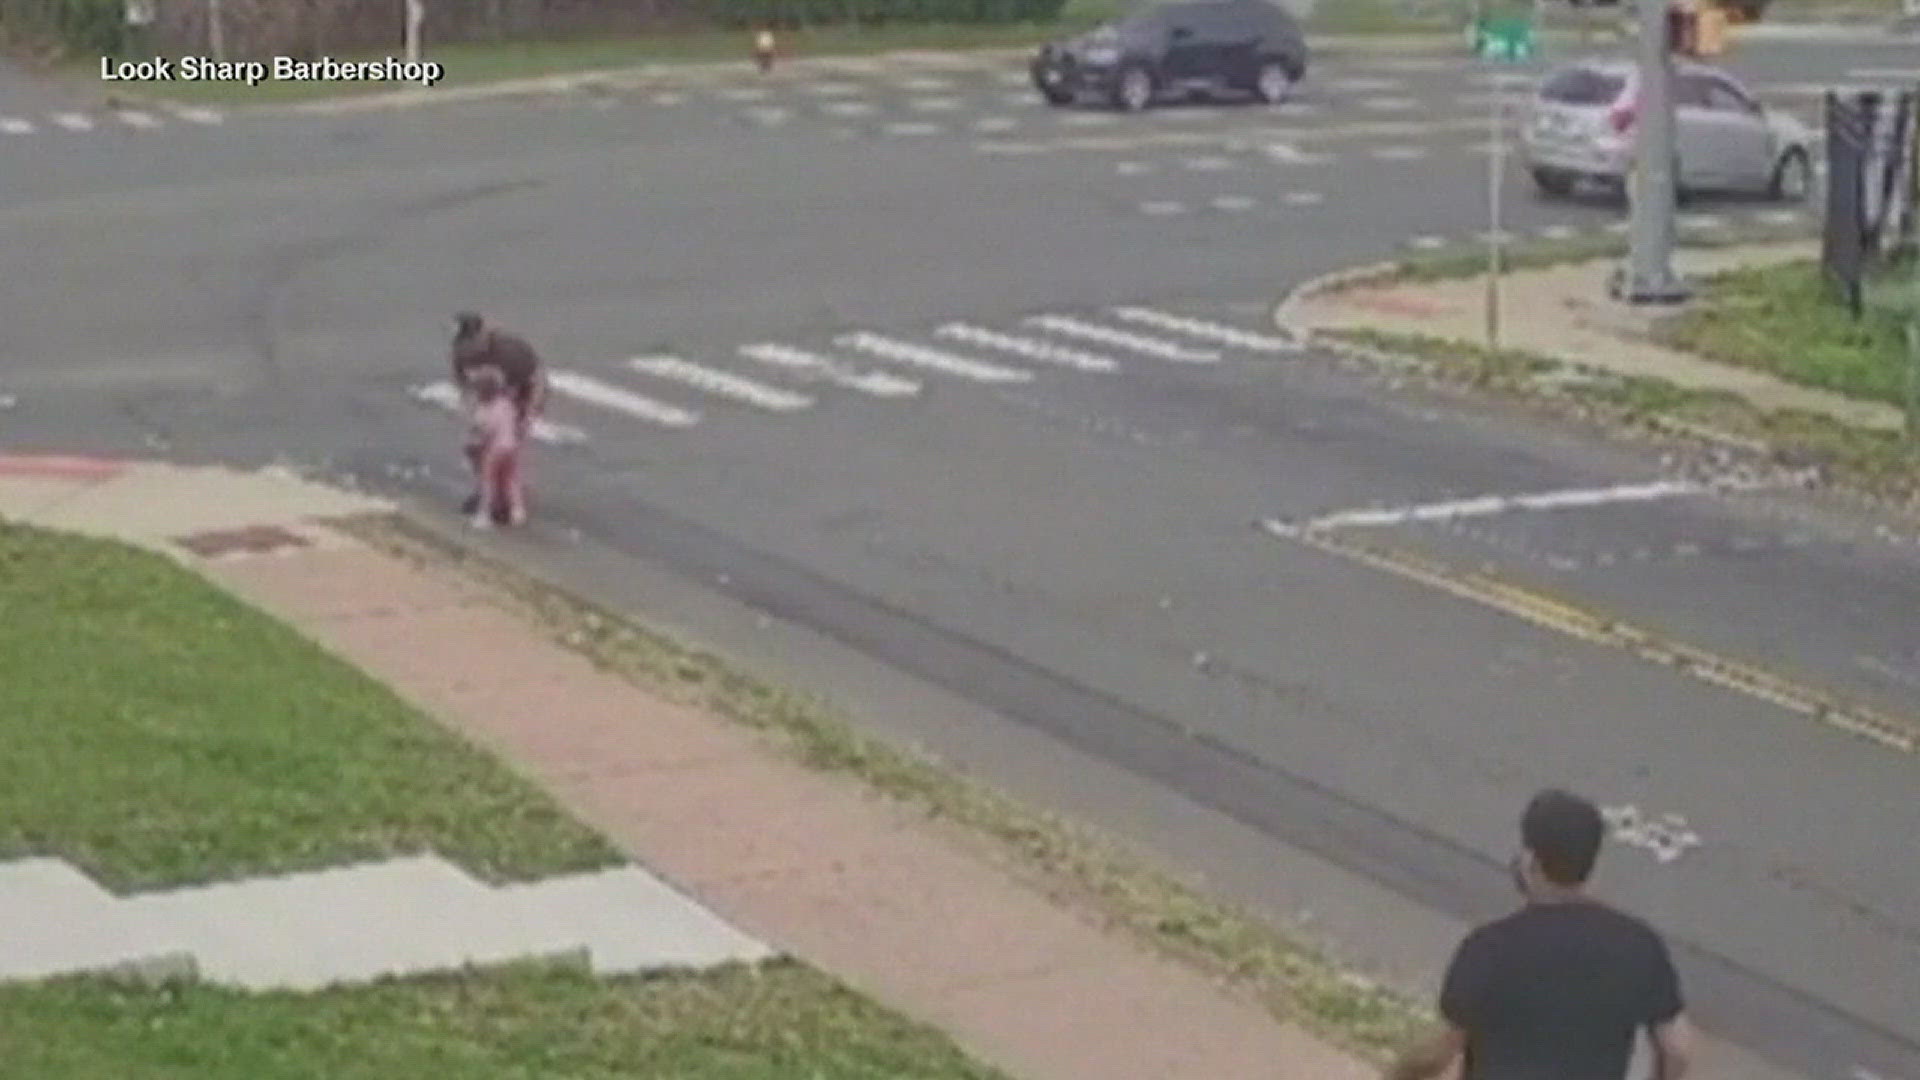 Two barbers from Connecticut are getting an enormous amount of thanks after they rushed to stop a little girl from running towards a busy intersection.